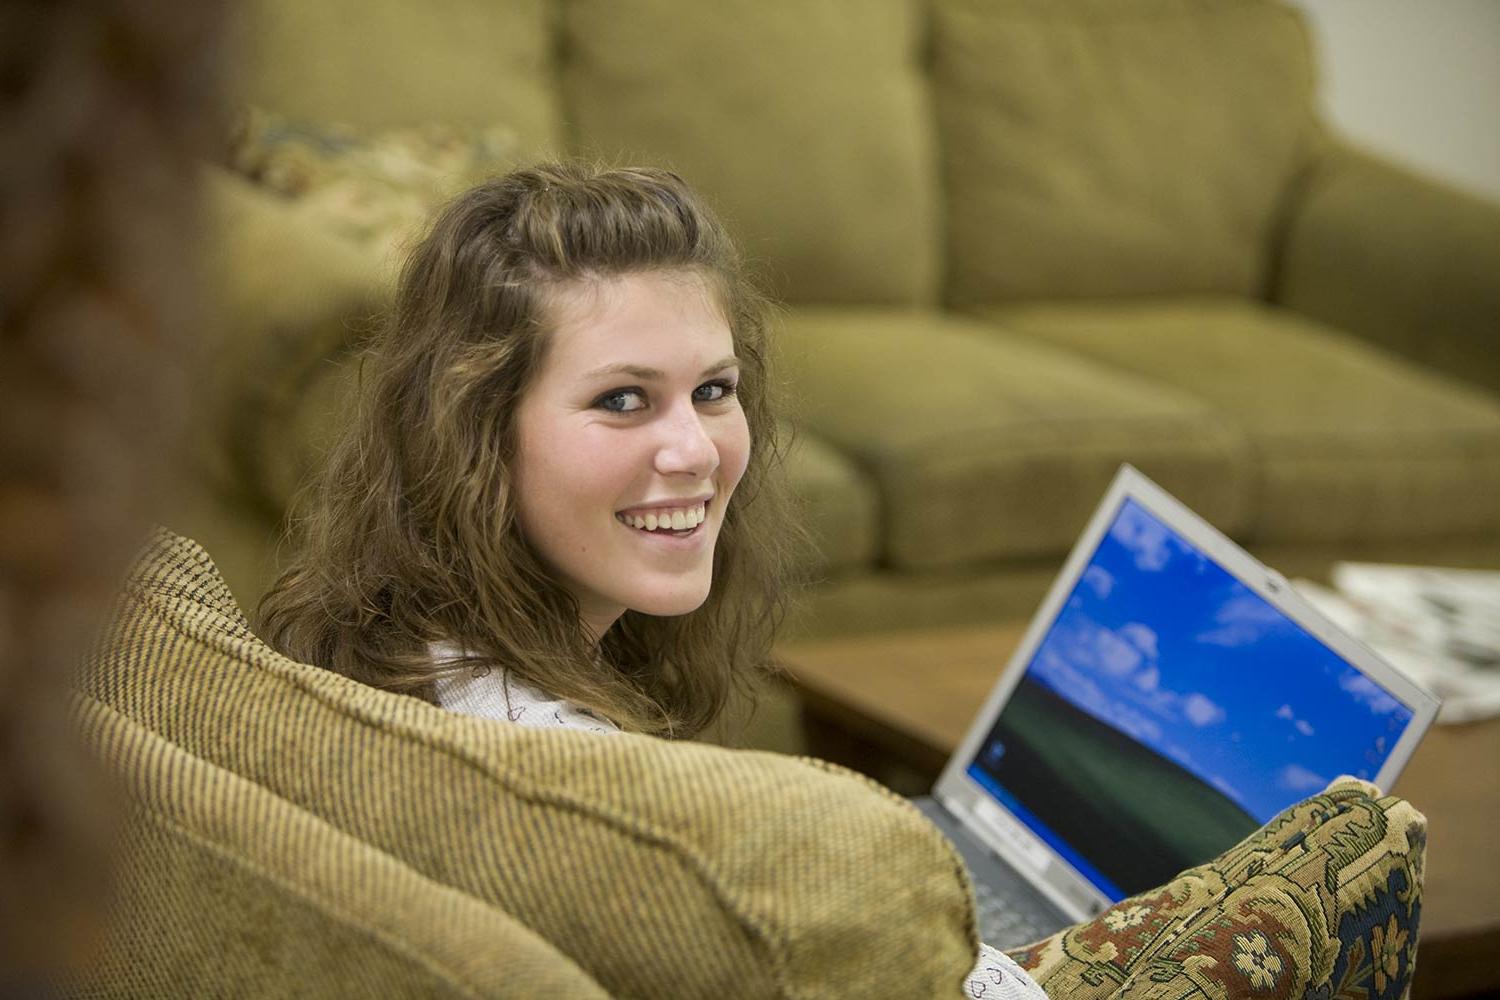 Student studying in residence hall